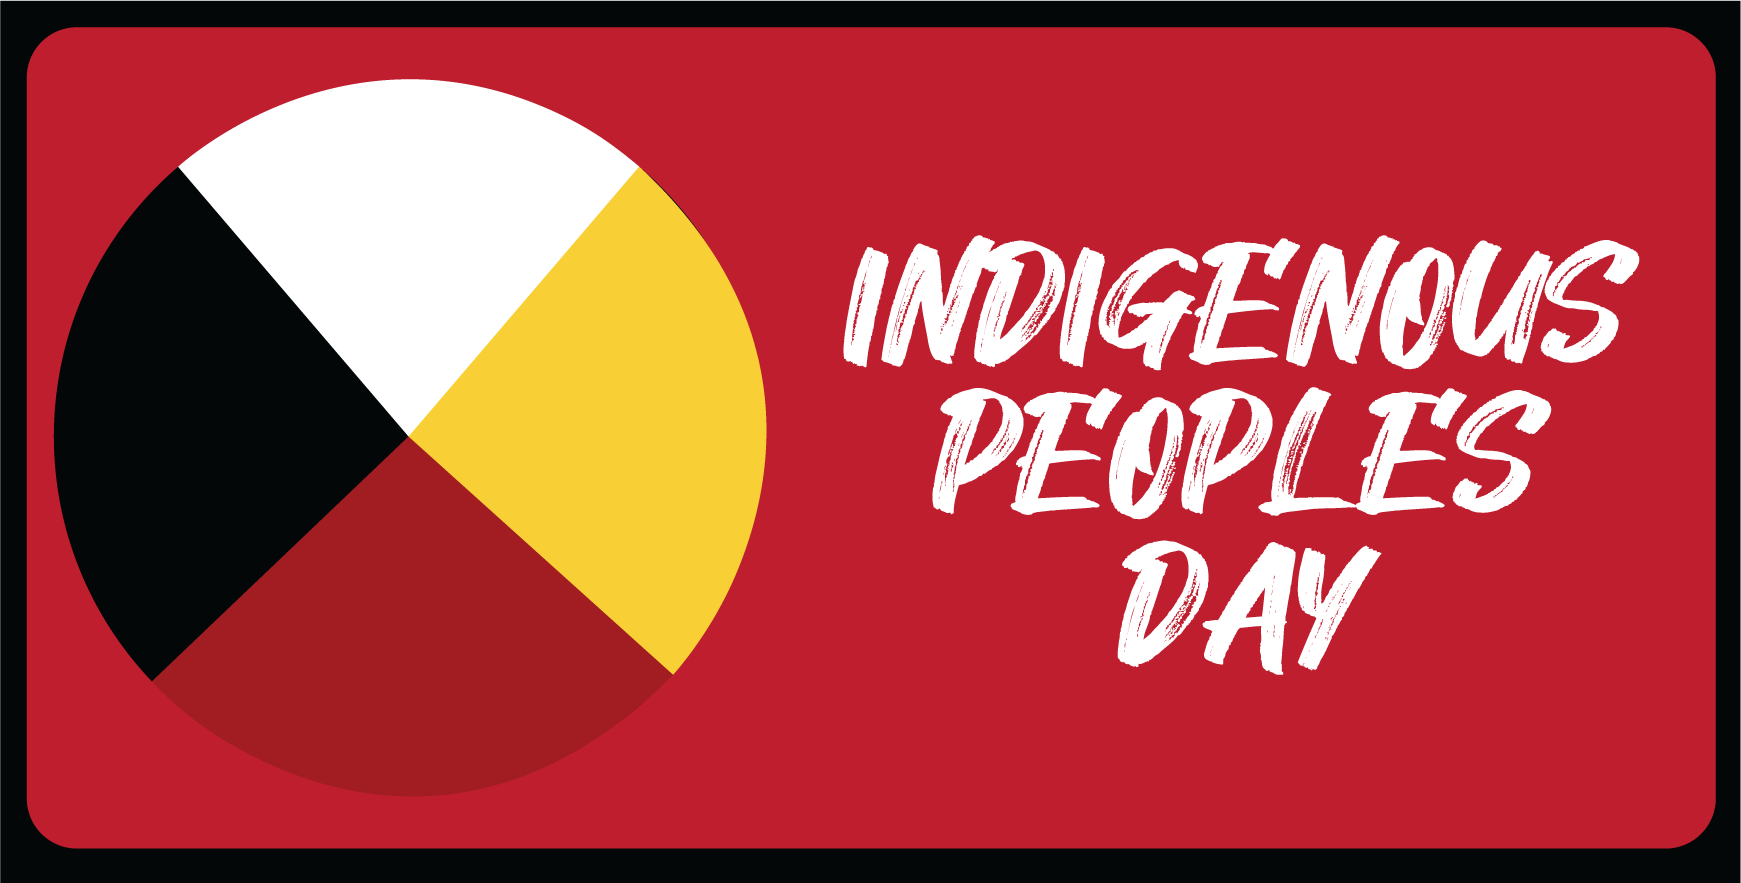 Red background with "Indigenous Peoples' Day" in white text on the right side. On the left, is a circle split into 4 quadrants of the colors black, white, yellow, and red.